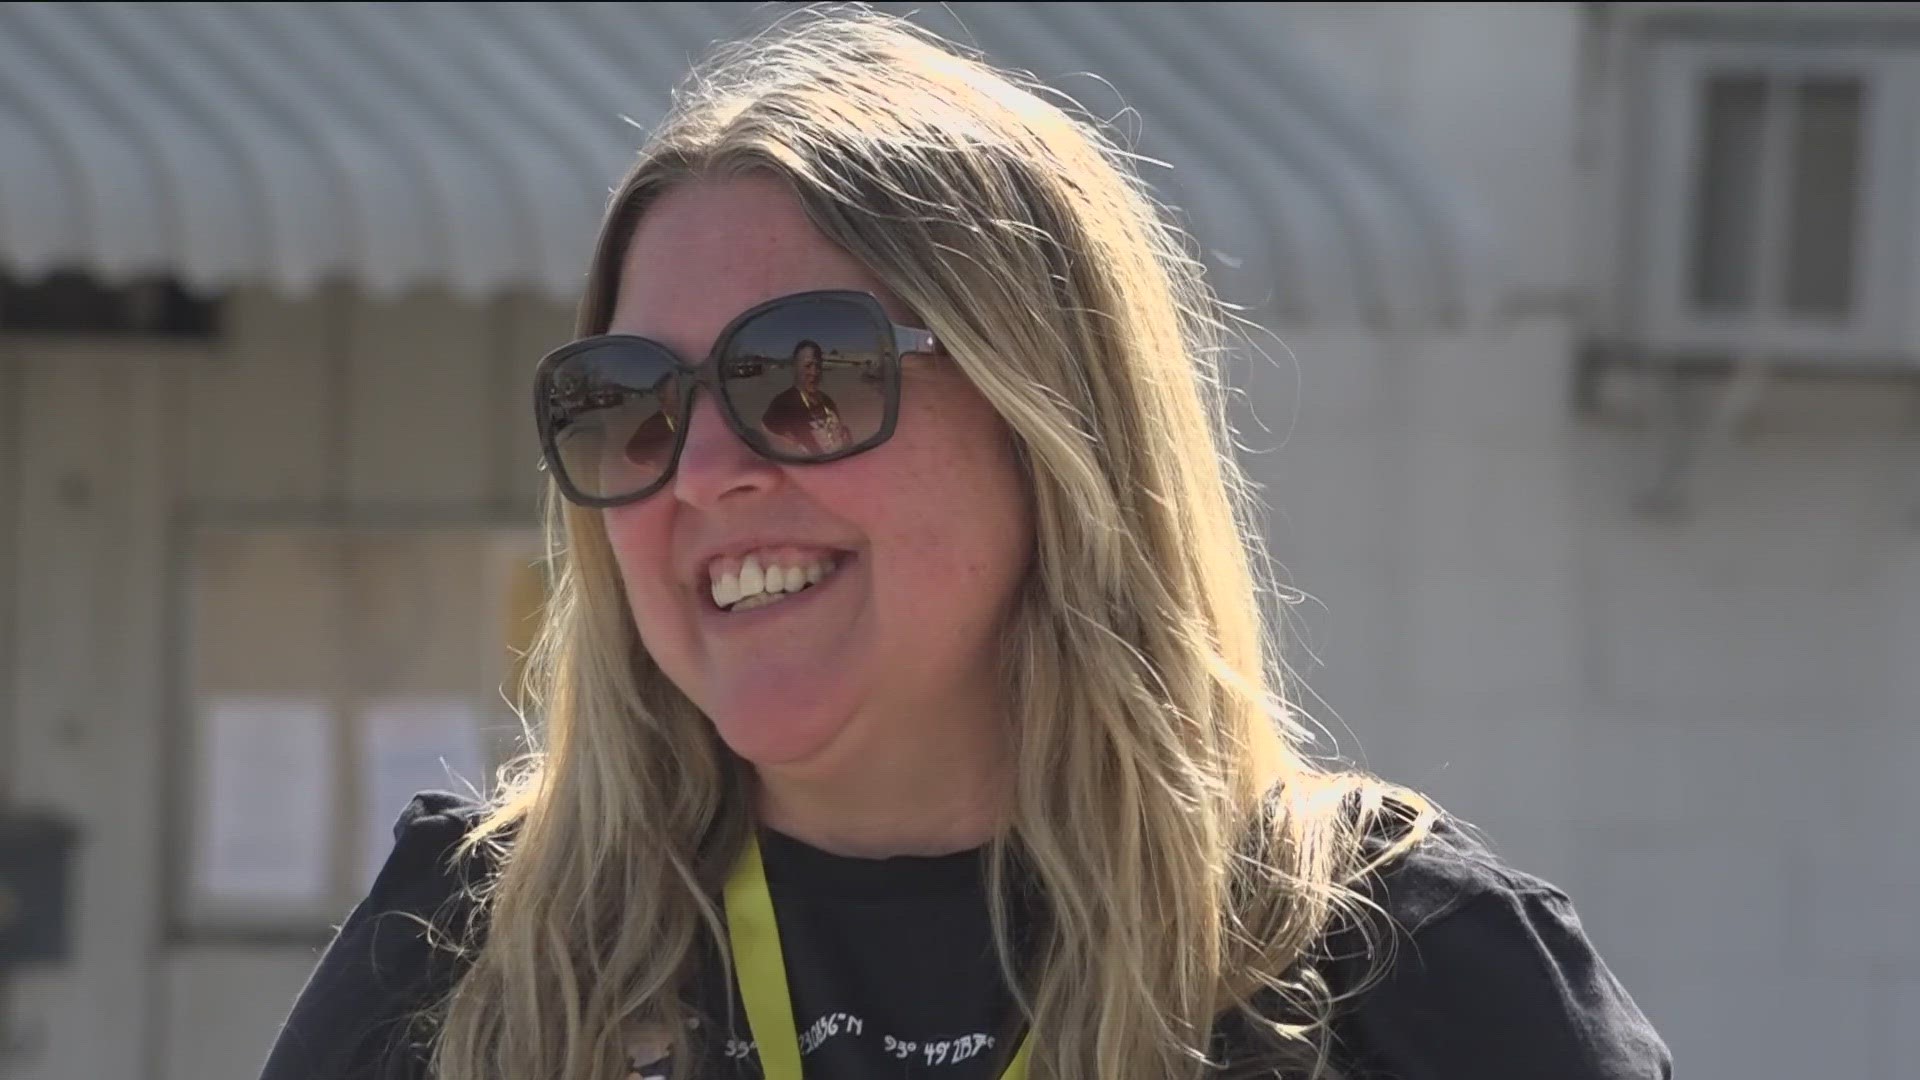 "I'm 48 and a half and Arkansas was my 50th state, so I made it a point to come here," Jennifer Ward said. "The eclipse seemed like a special time to come."